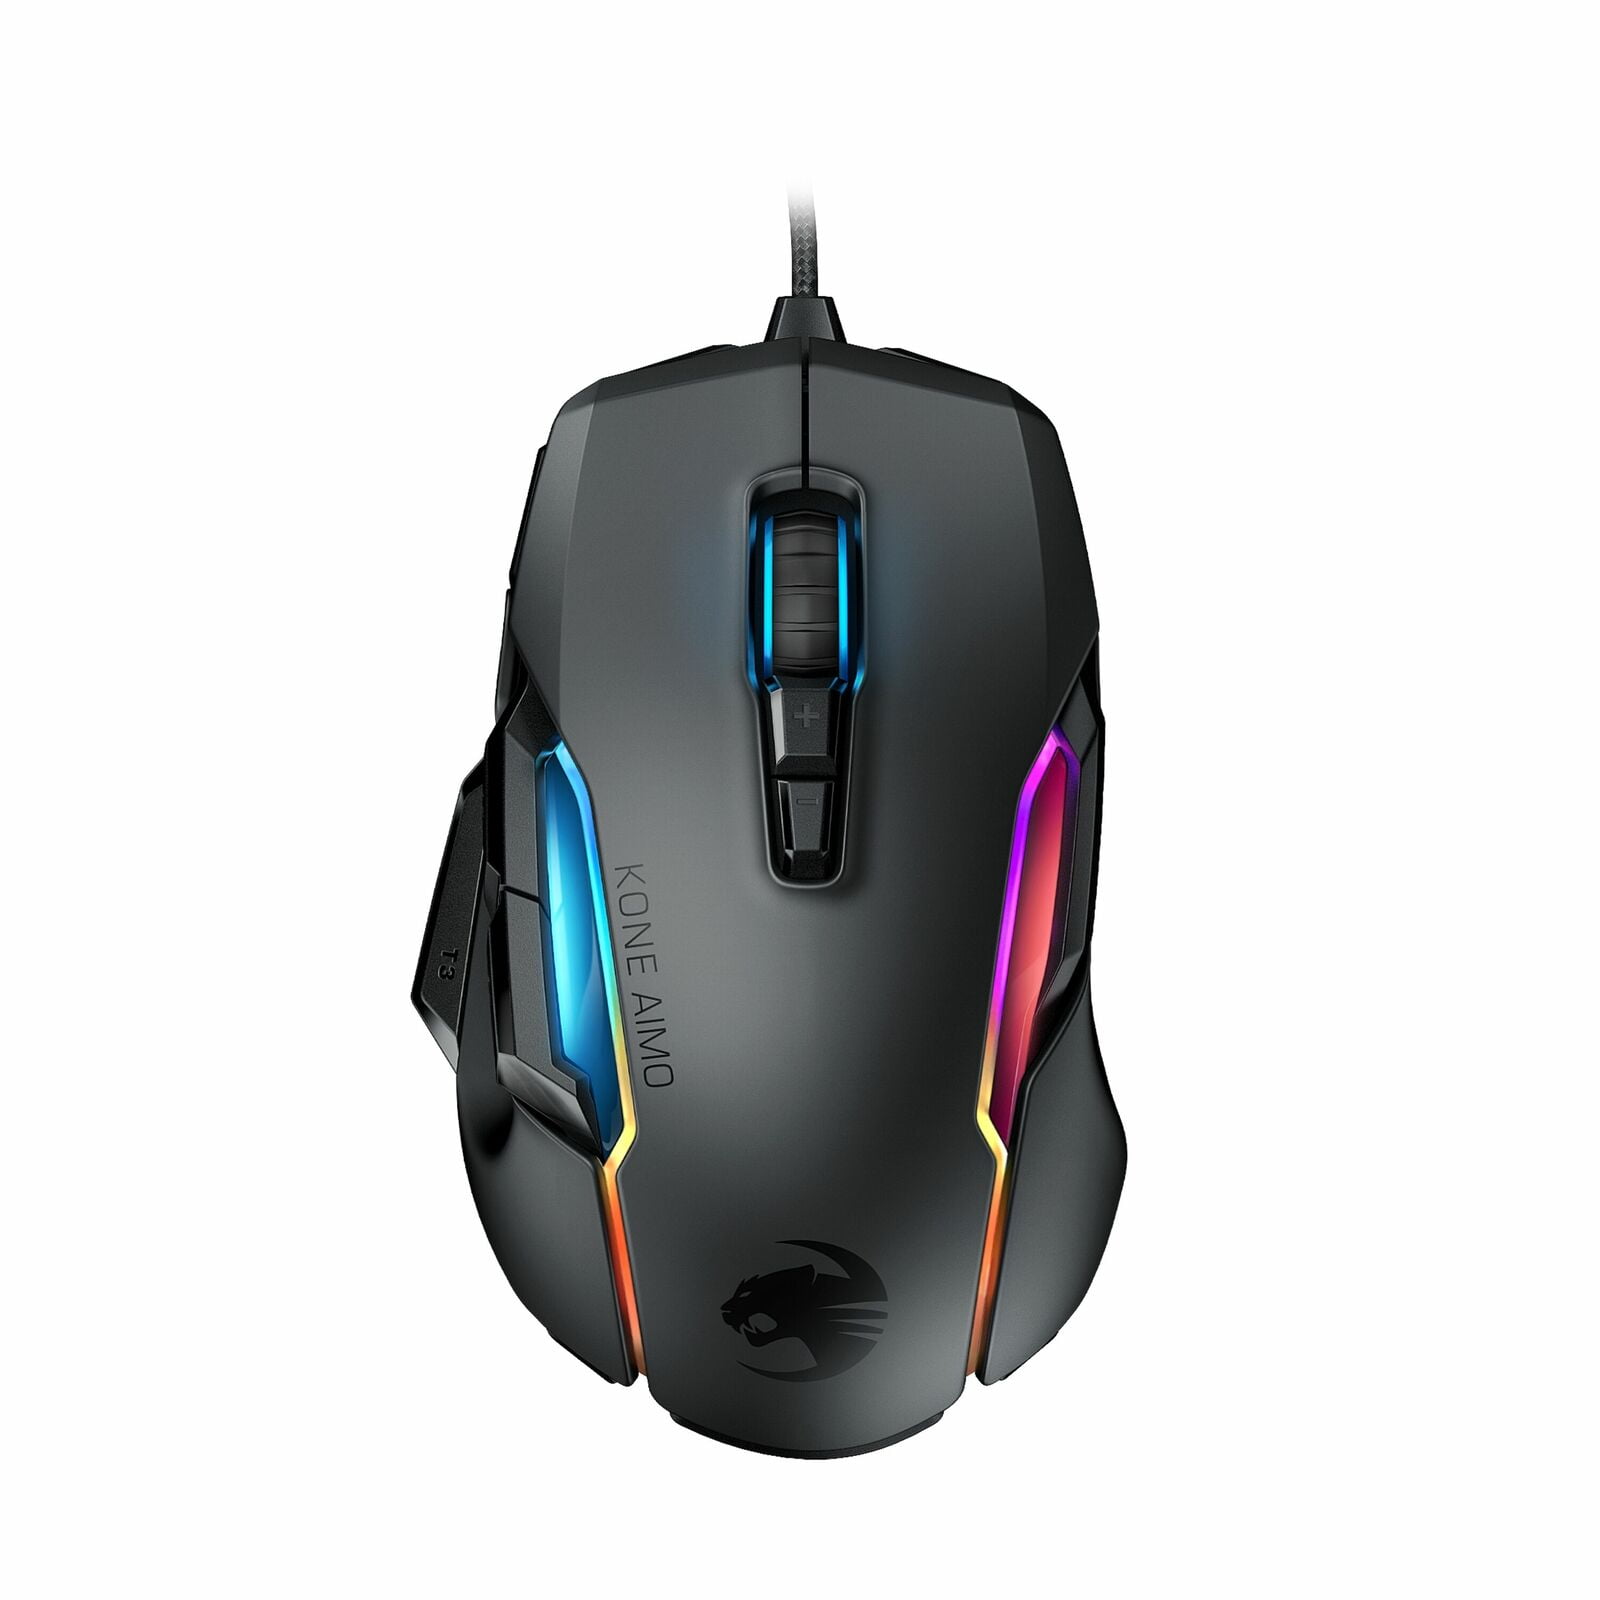 Roccat Kone Aimo RGBA Wired Gaming Mouse ROC-11-820-BK Black TESTED